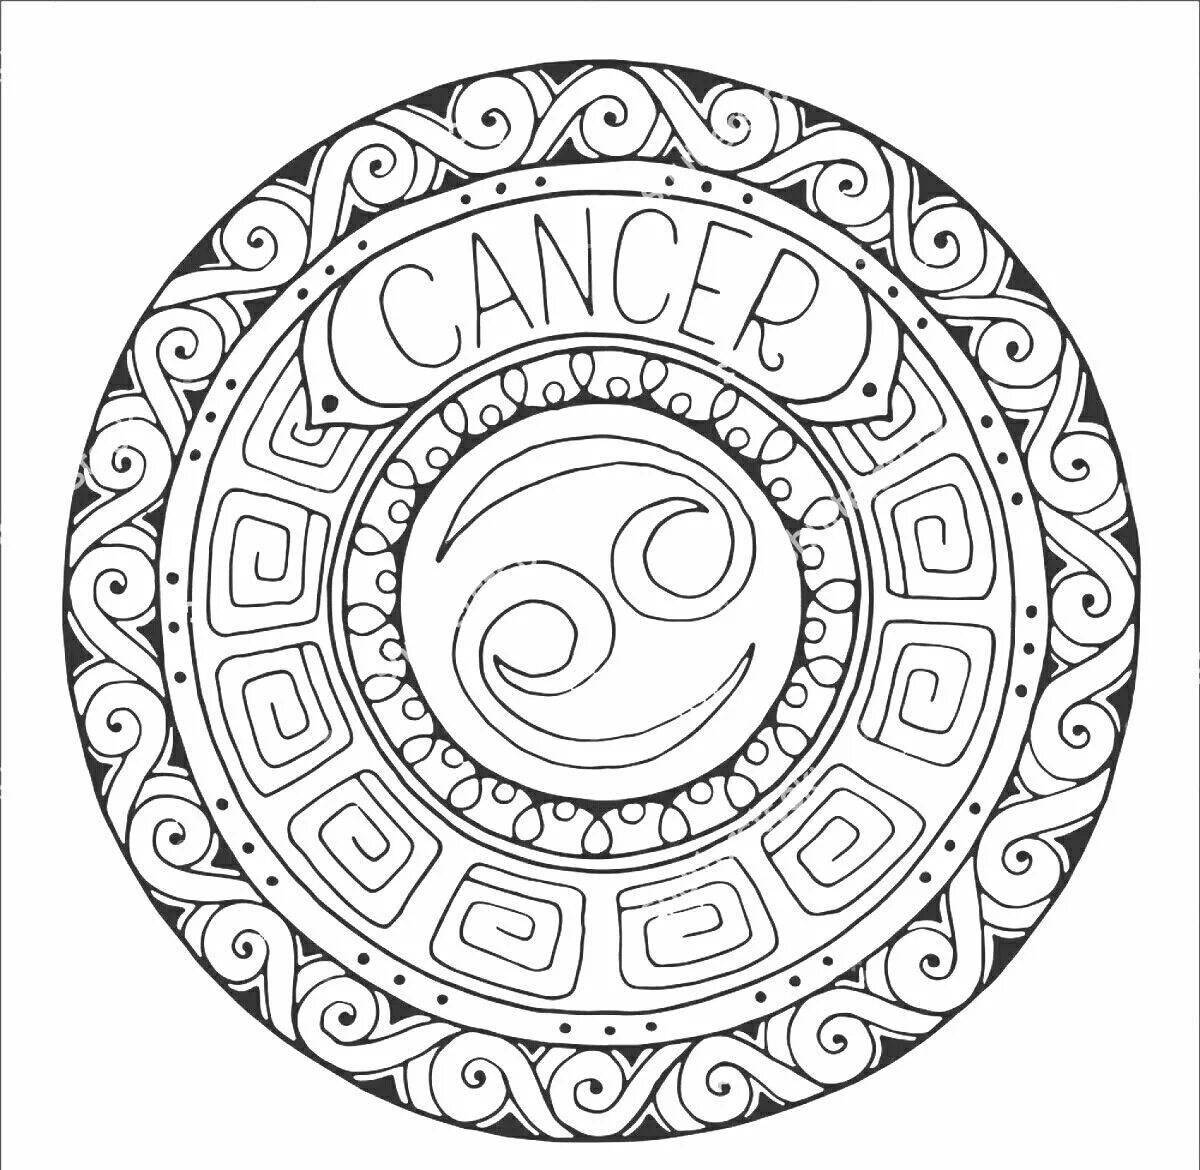 Lovely cancer coloring page